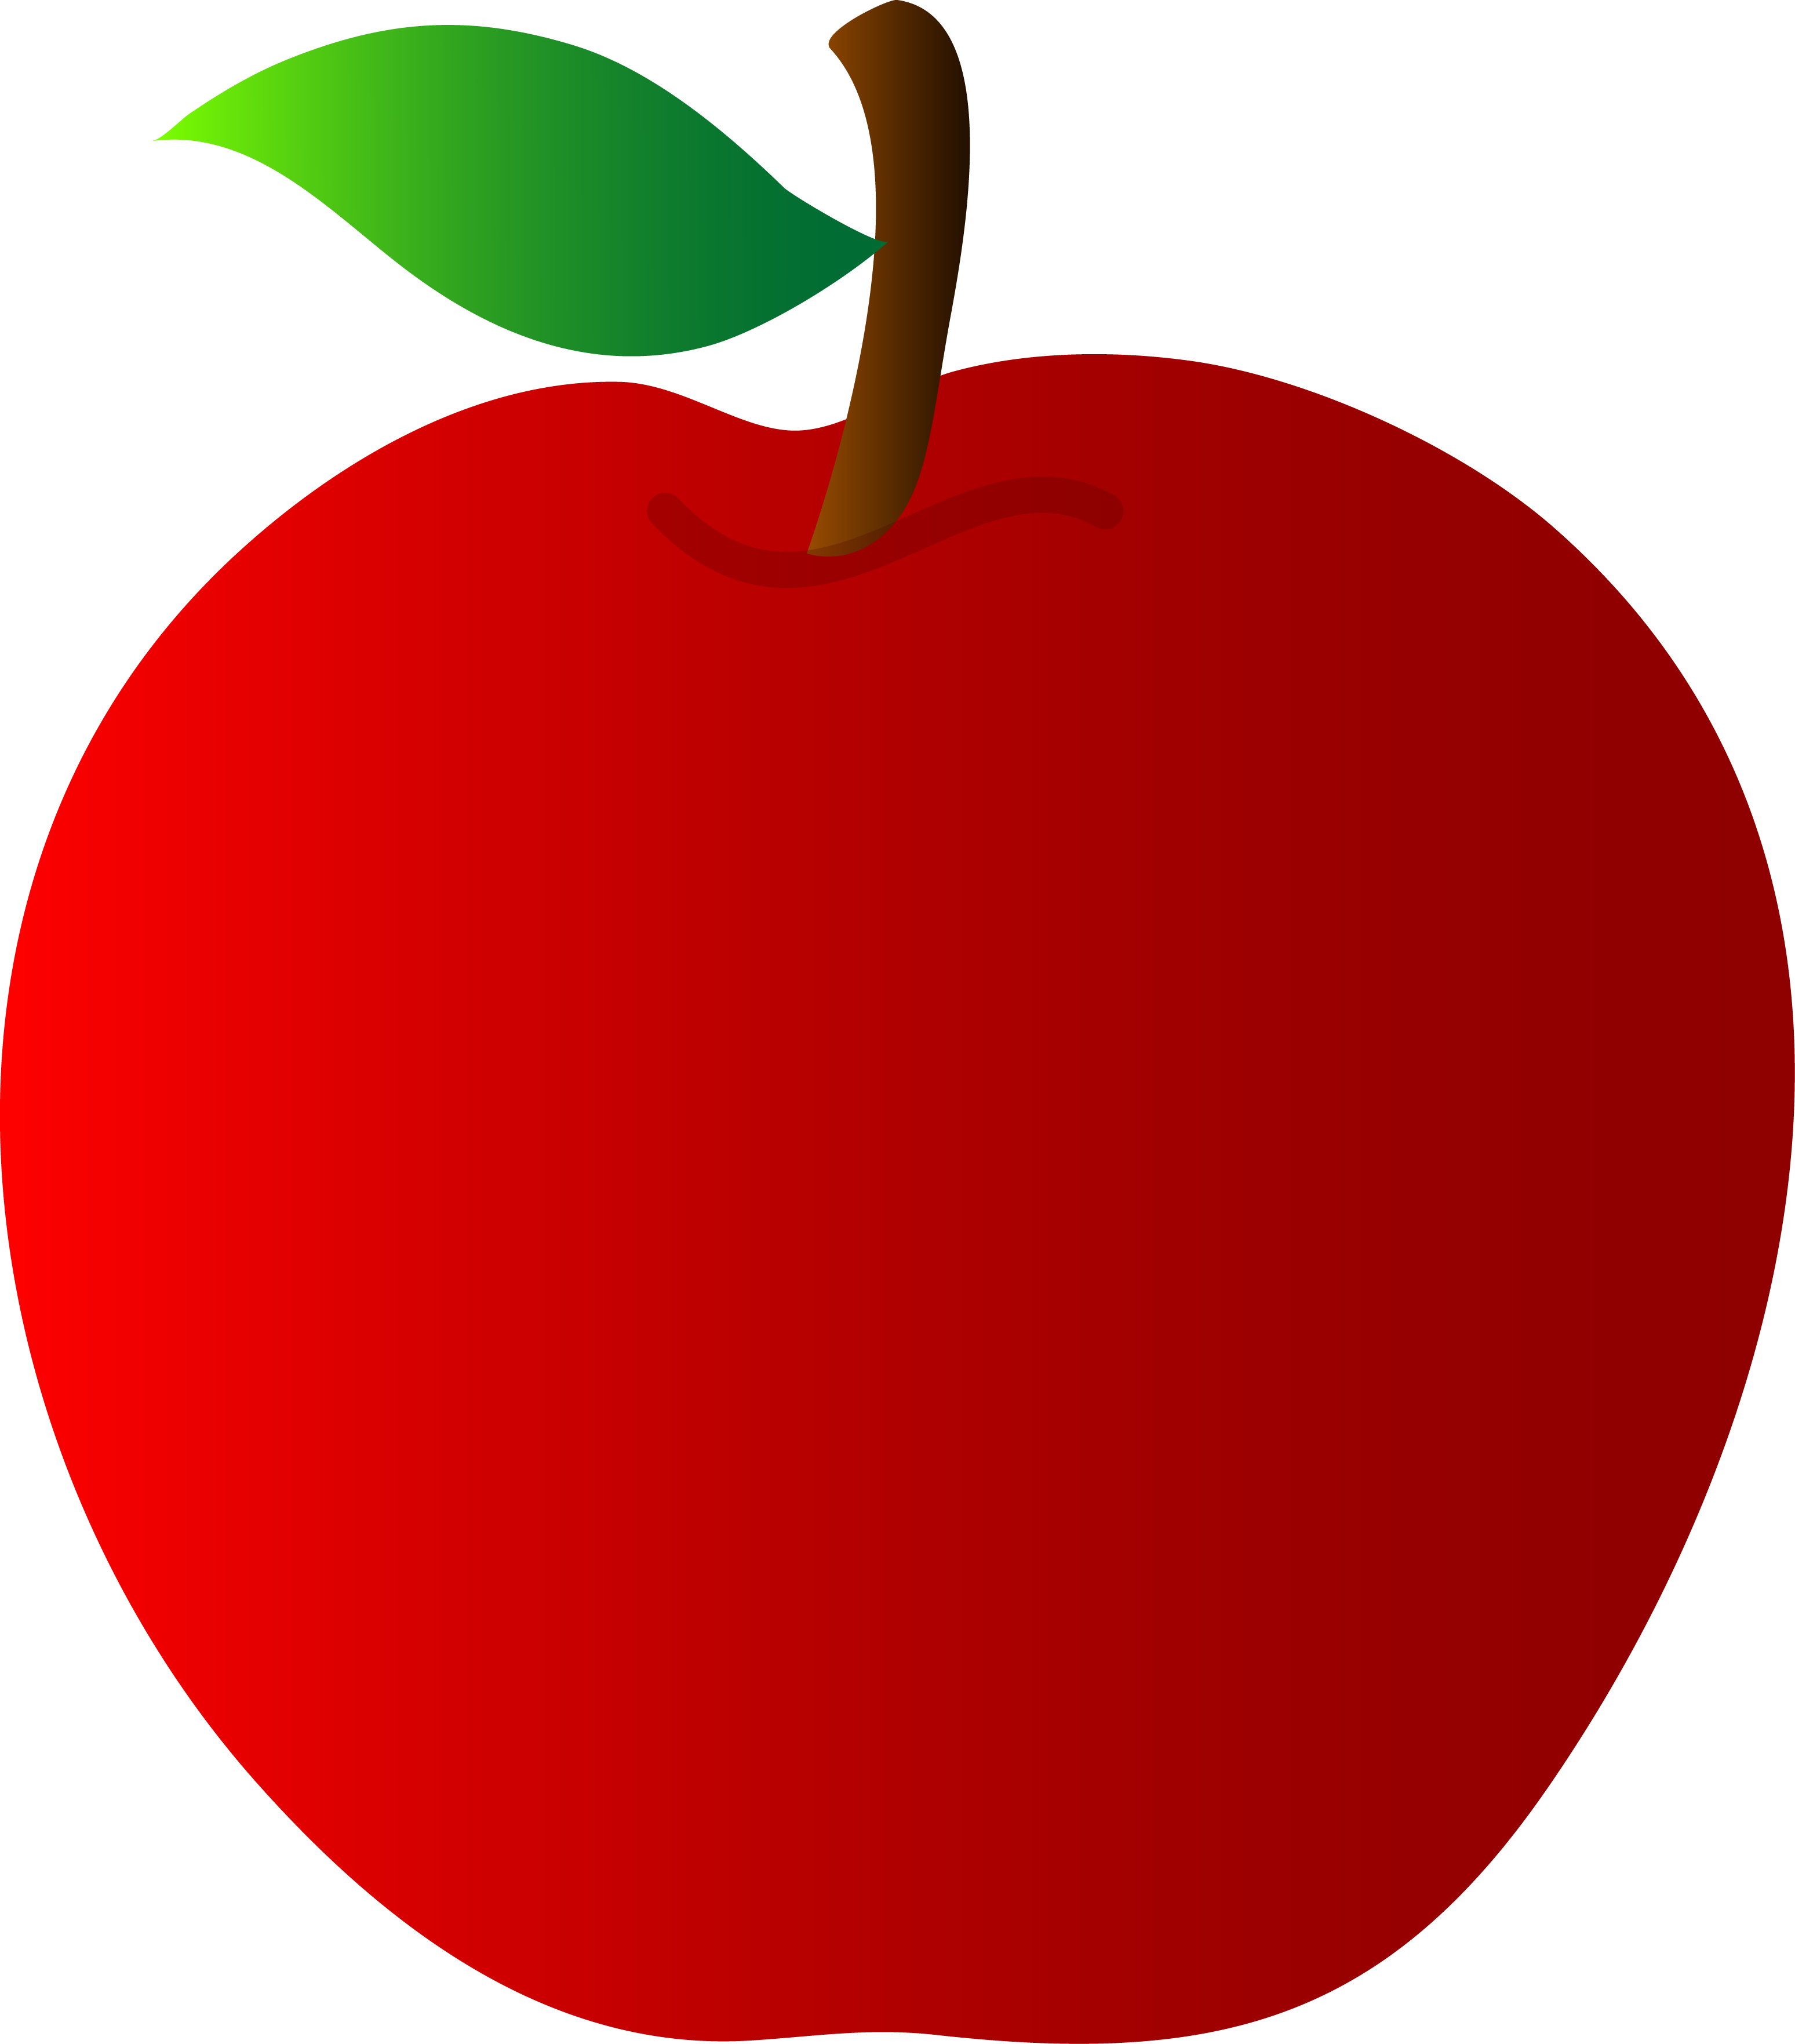 32+ Clipart Apple Images Background